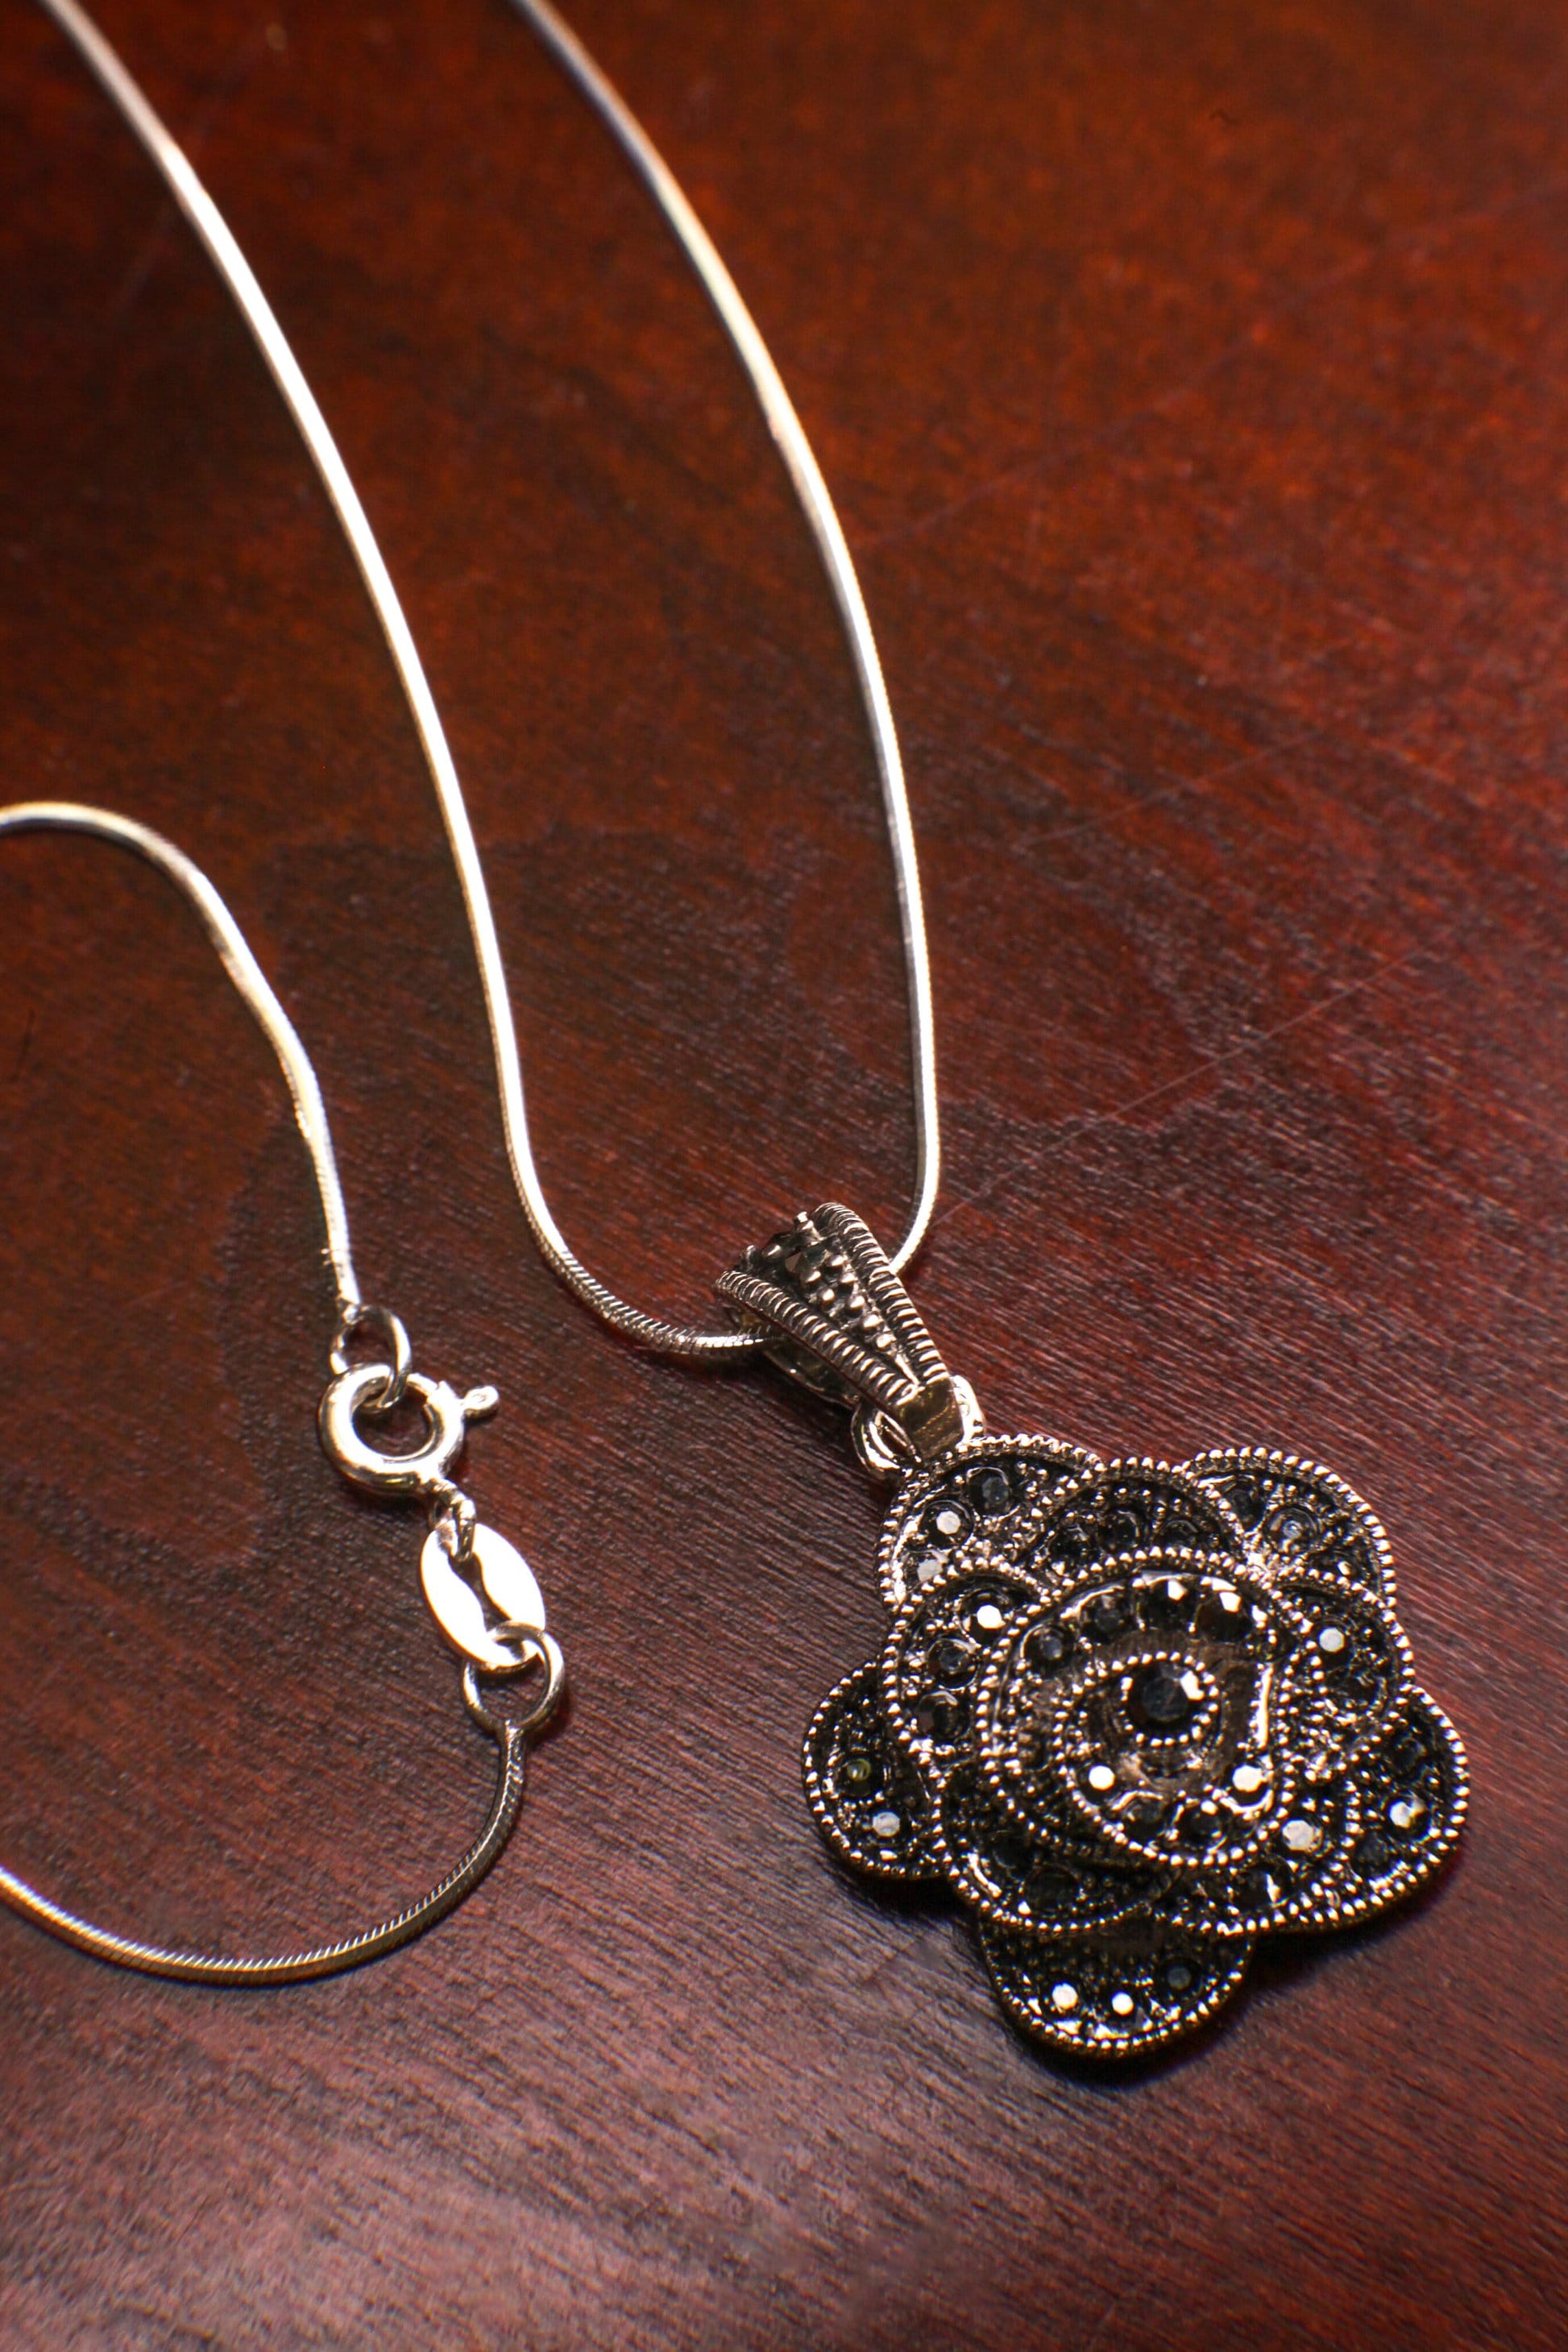 Vintage Marcasite 925 Sterling Silver Rose Pendant 20mm with 925 Sterling Silver Snake Chain necklace